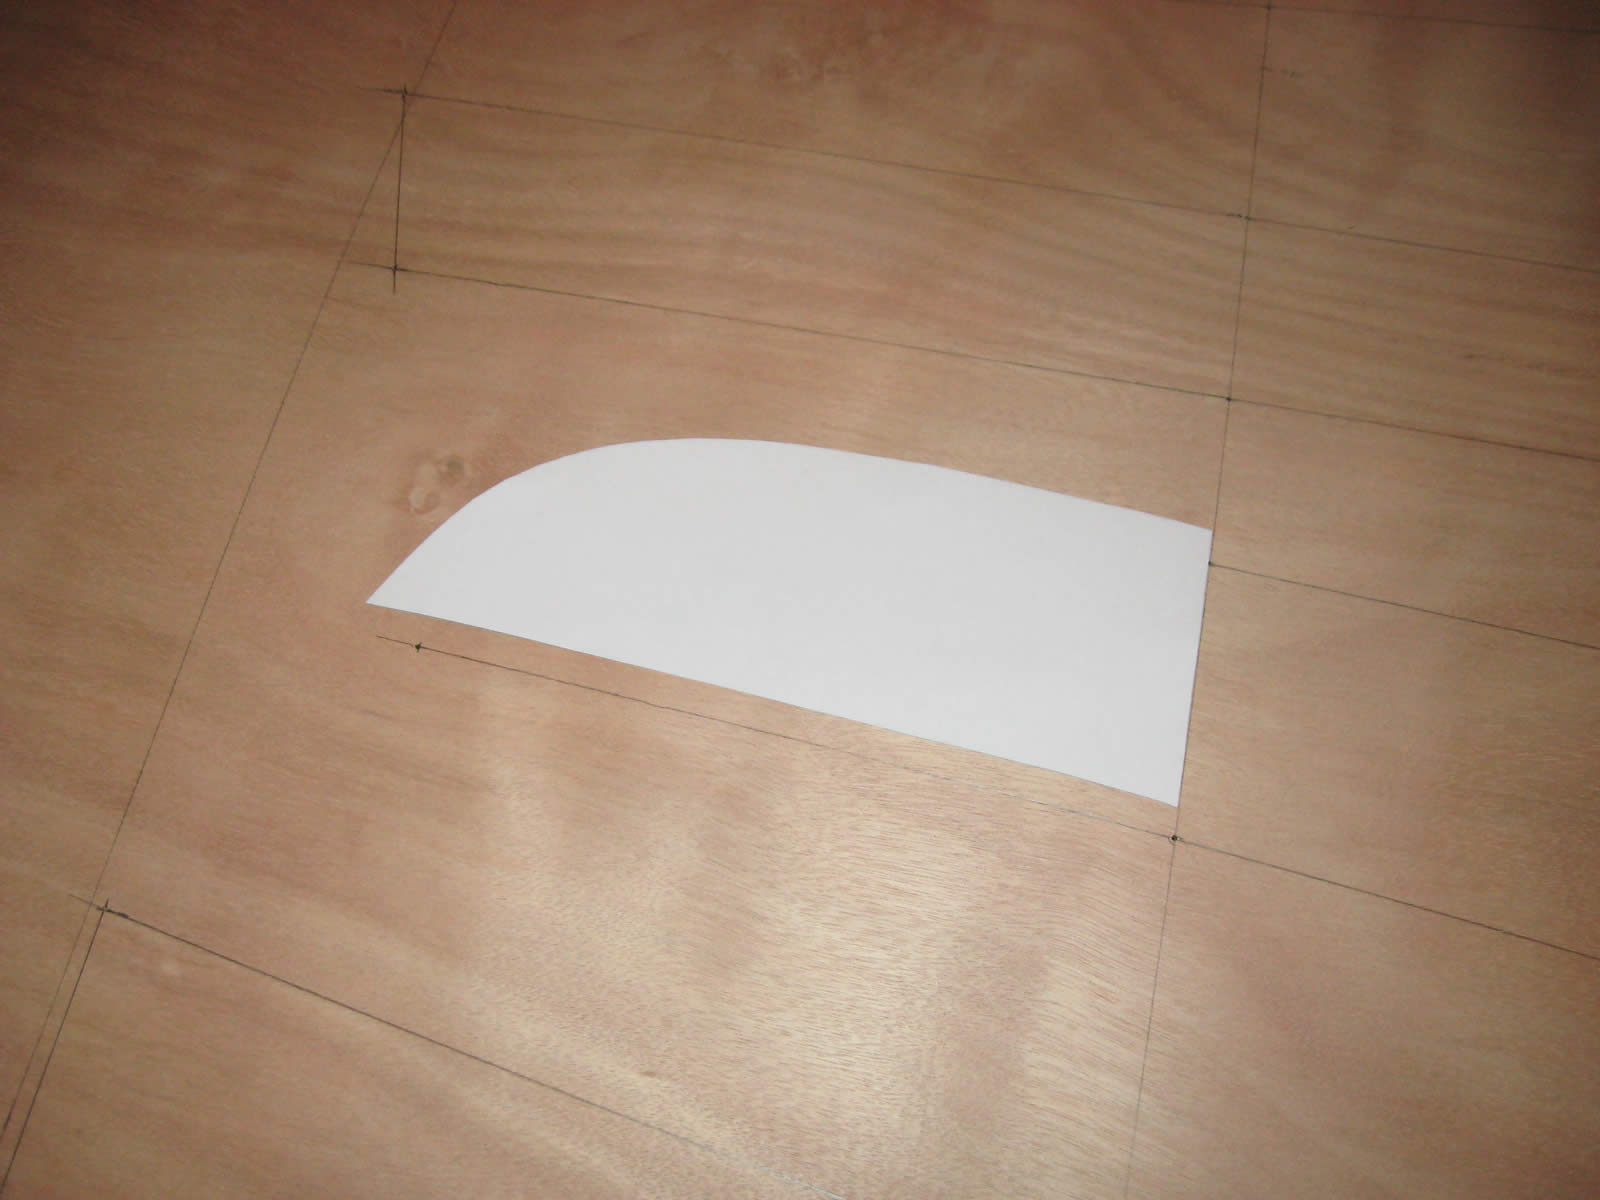 The template for the tip of plank #1.